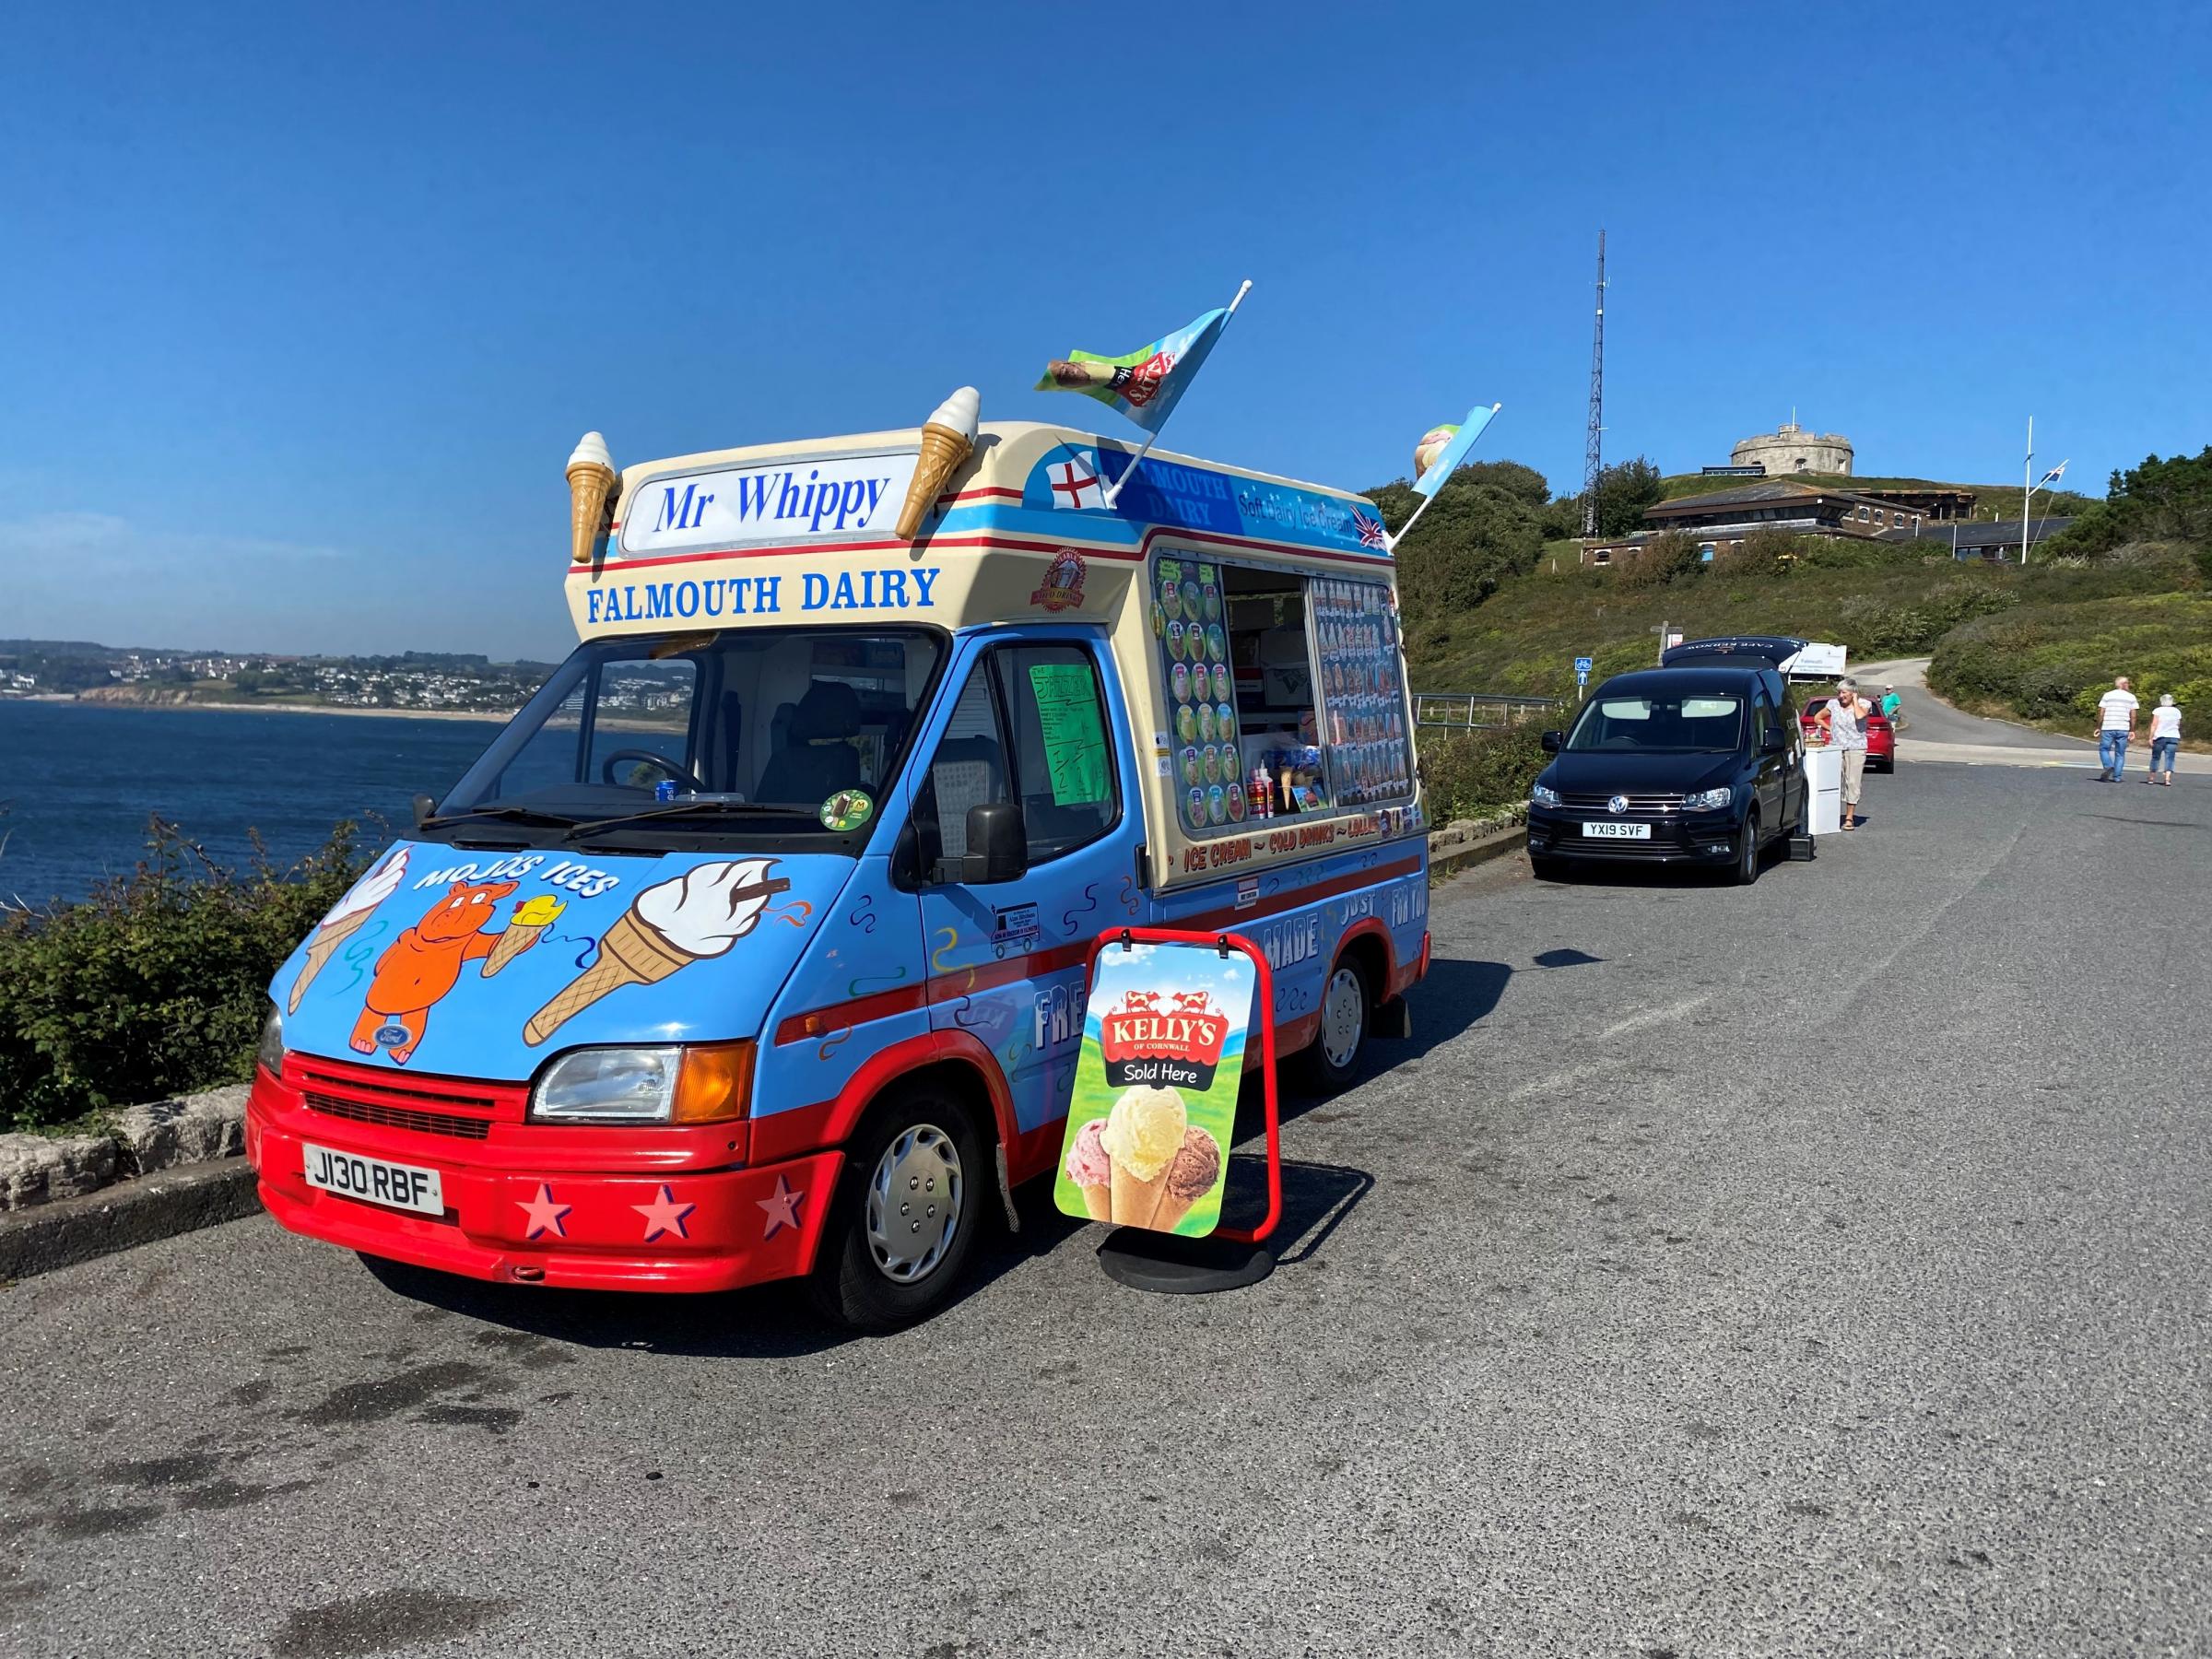 The Falmouth Dairy ice cream van set up at Pendennis Point